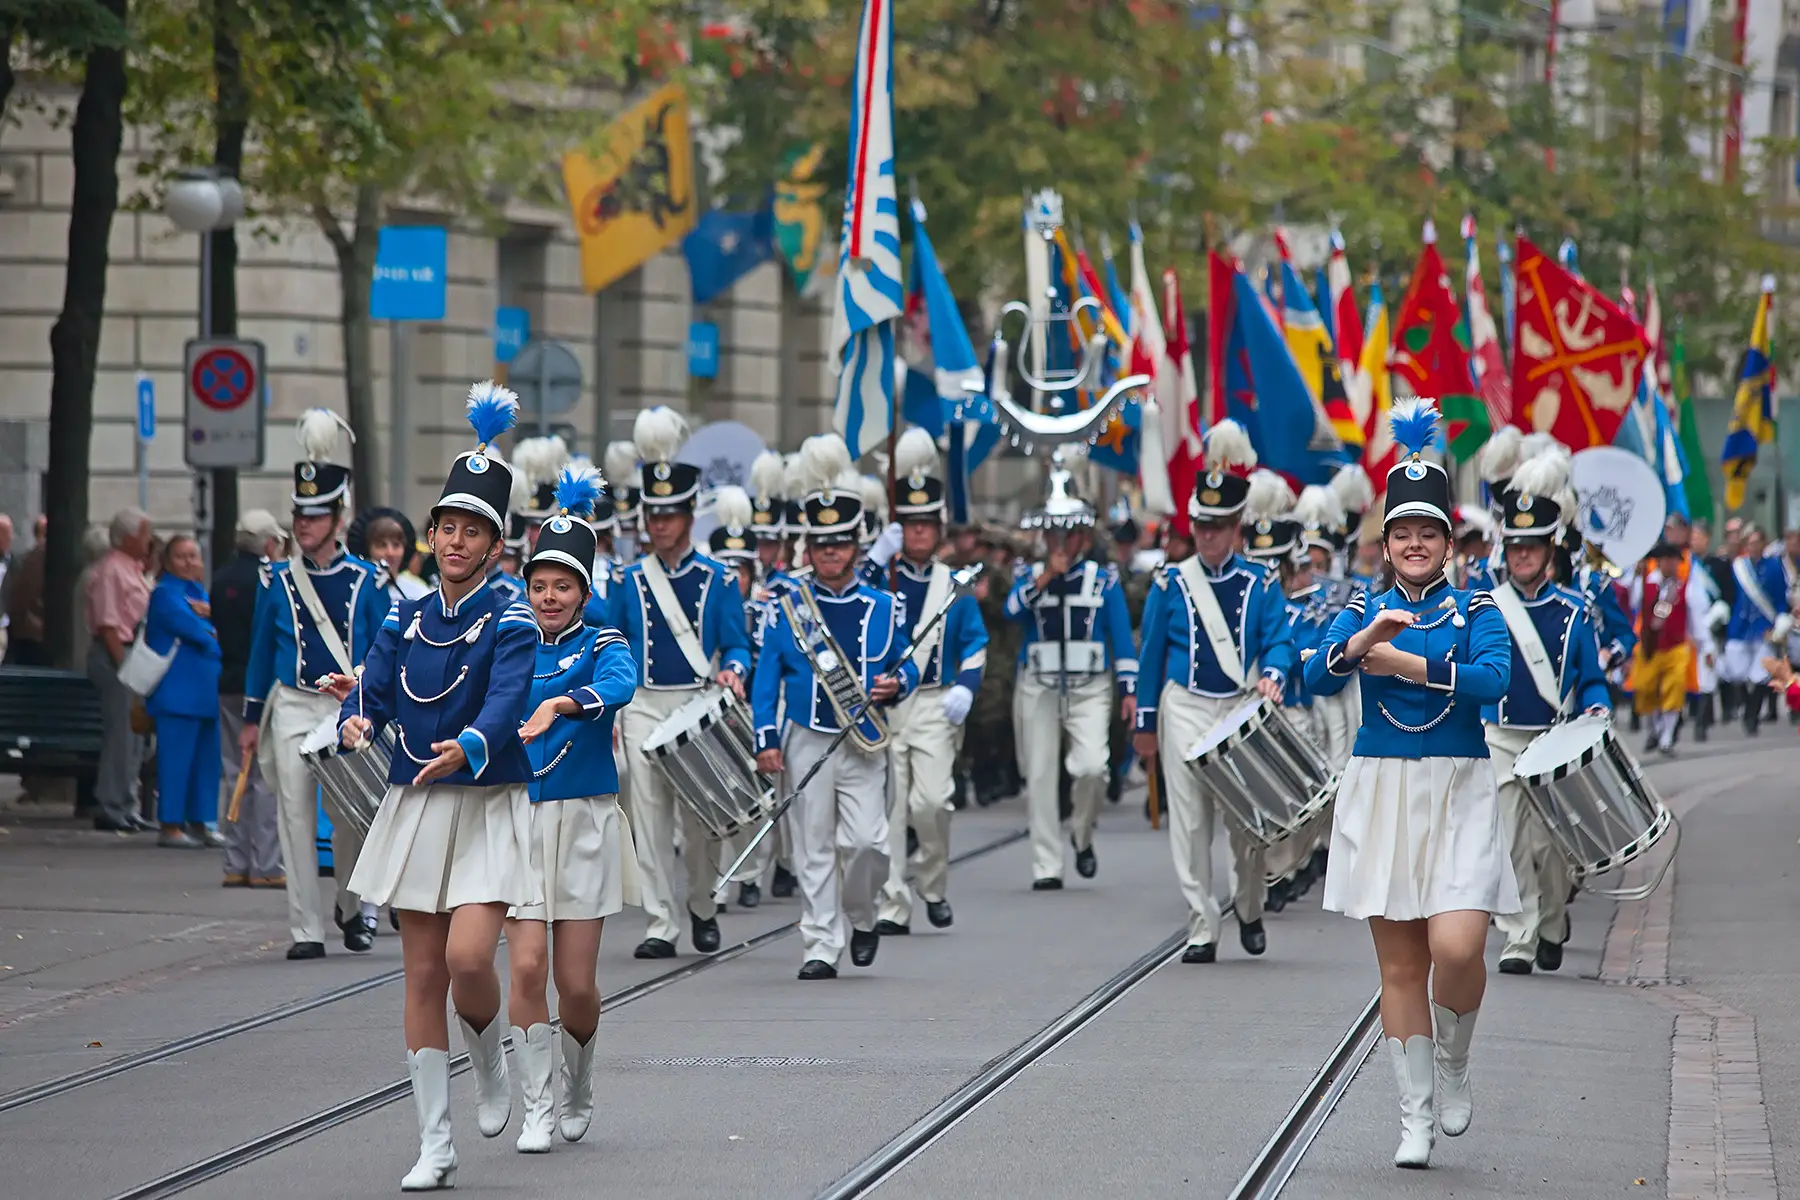 A Swiss National Day parade in Zurich